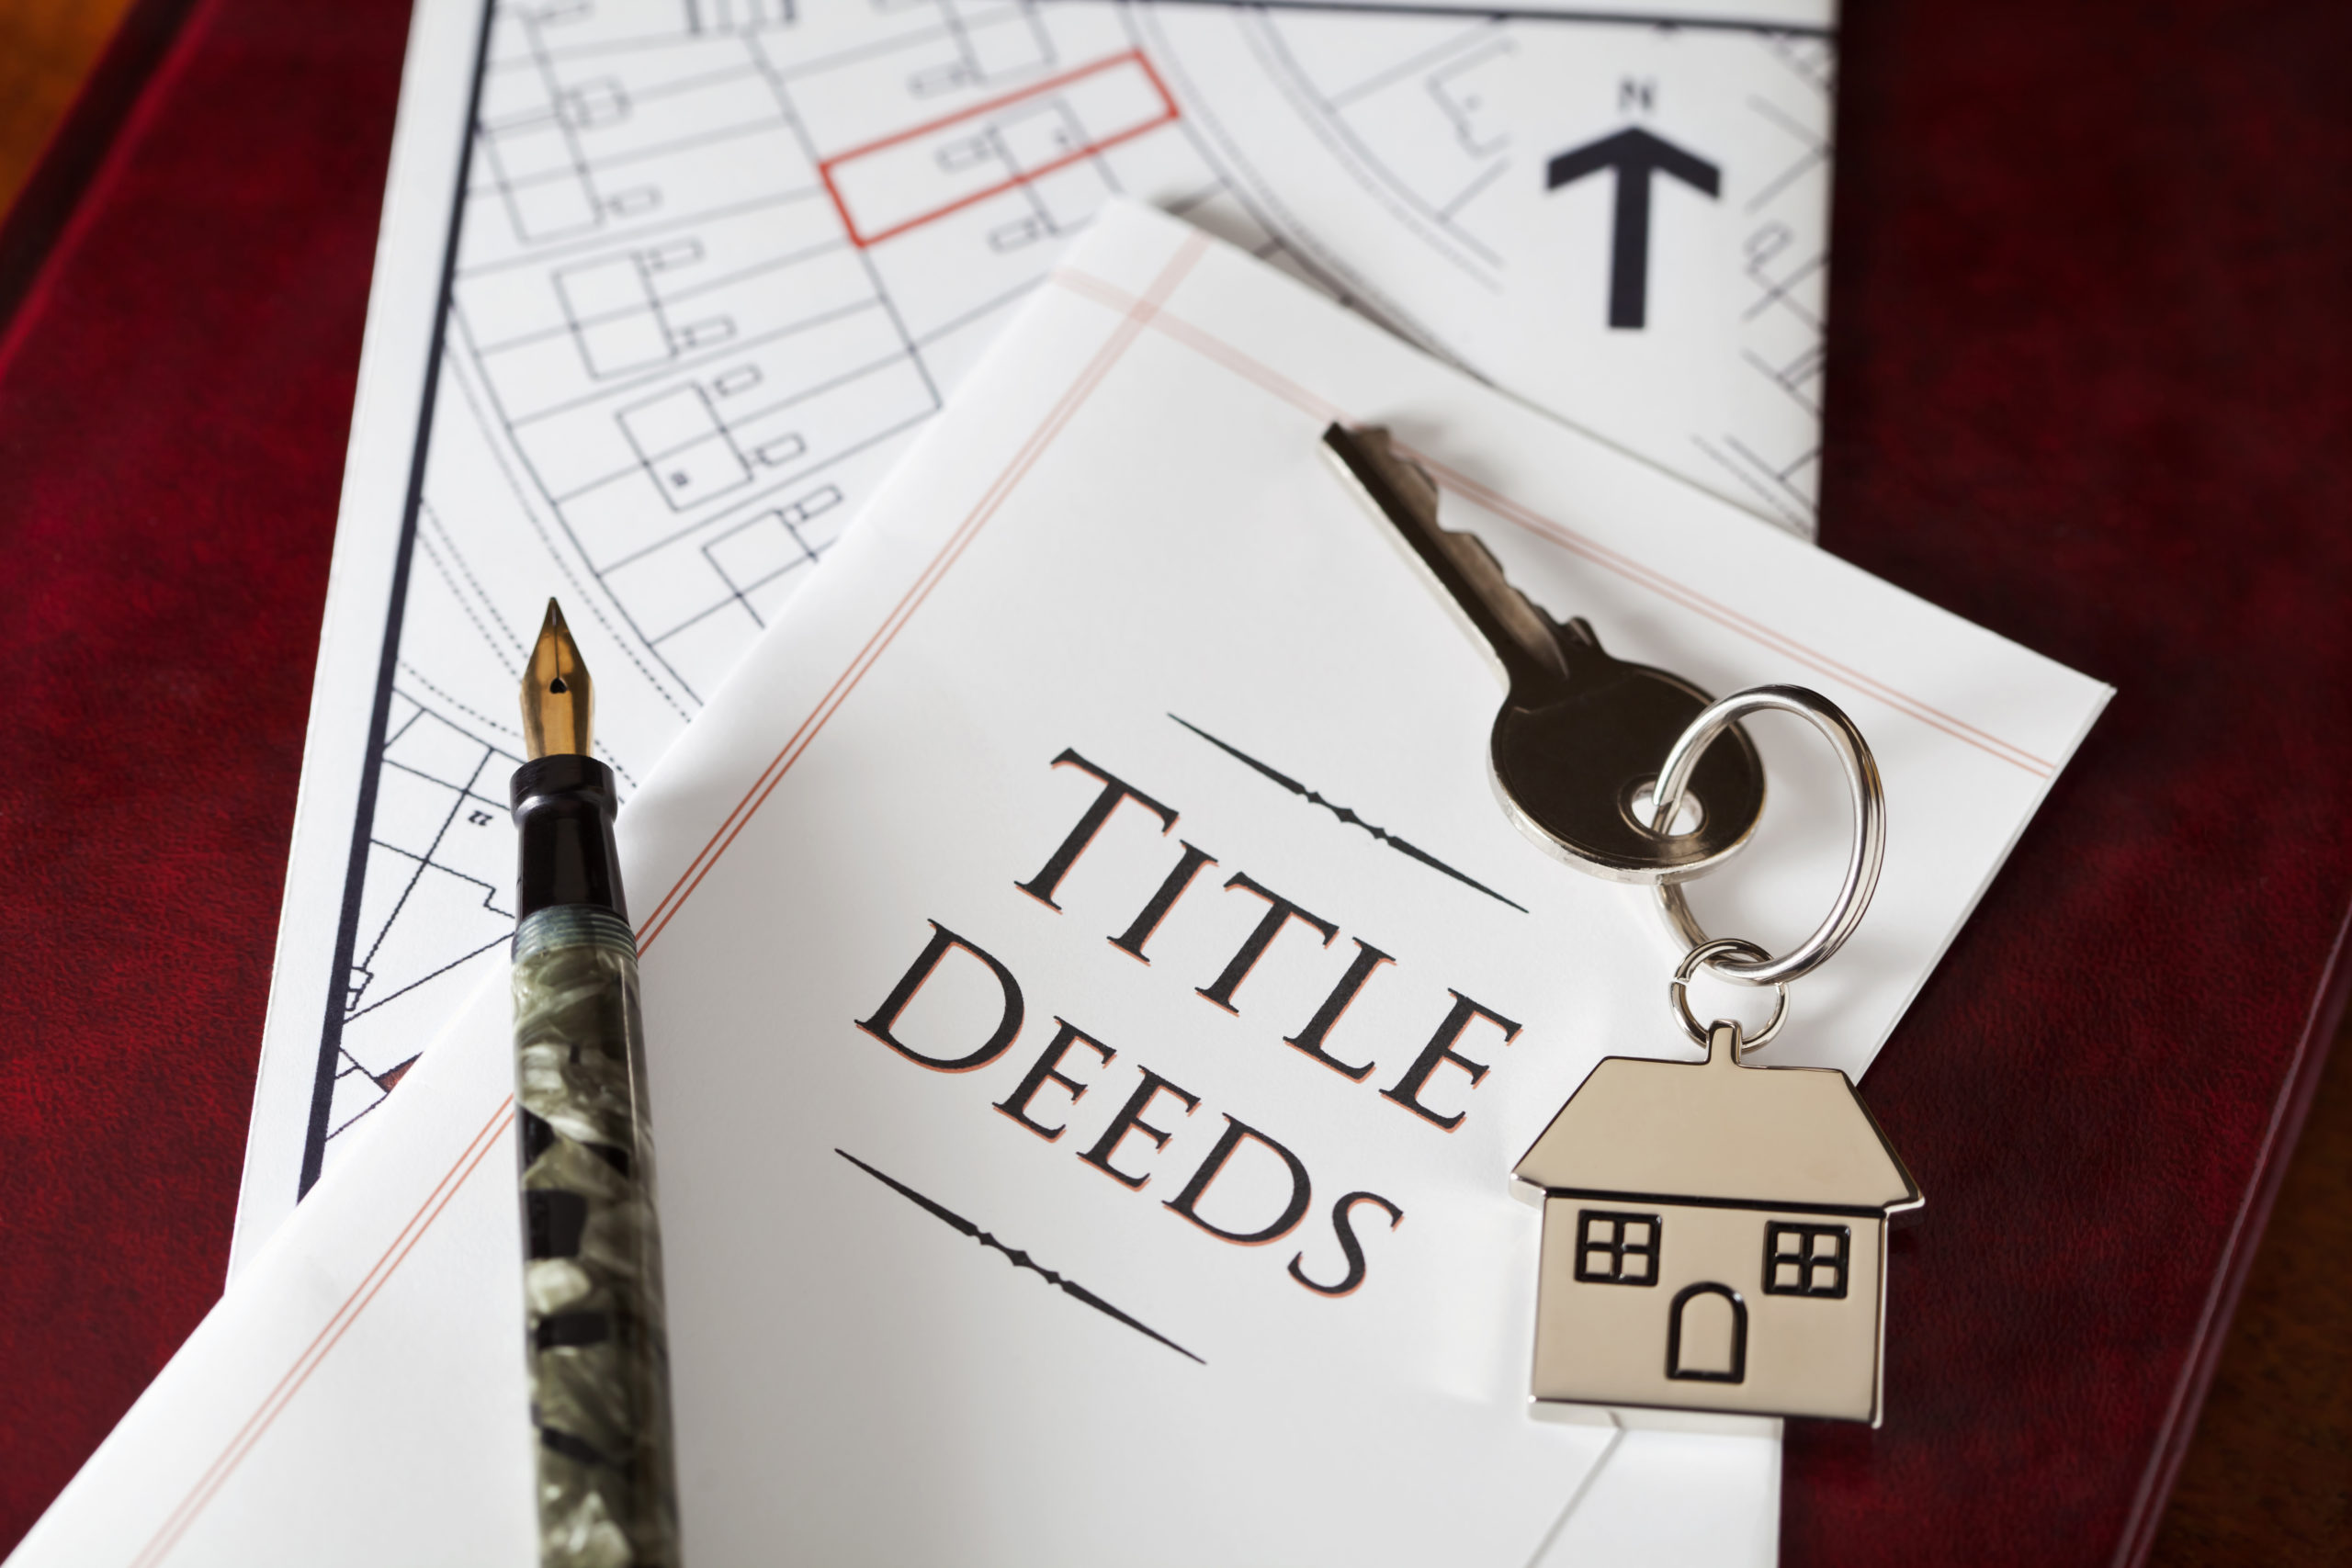 "Title Deeds show the ownership in addition to rights, obligations or mortgages on the property at the time of sale, purchase or transfer. This process is part of the conveyancing process."